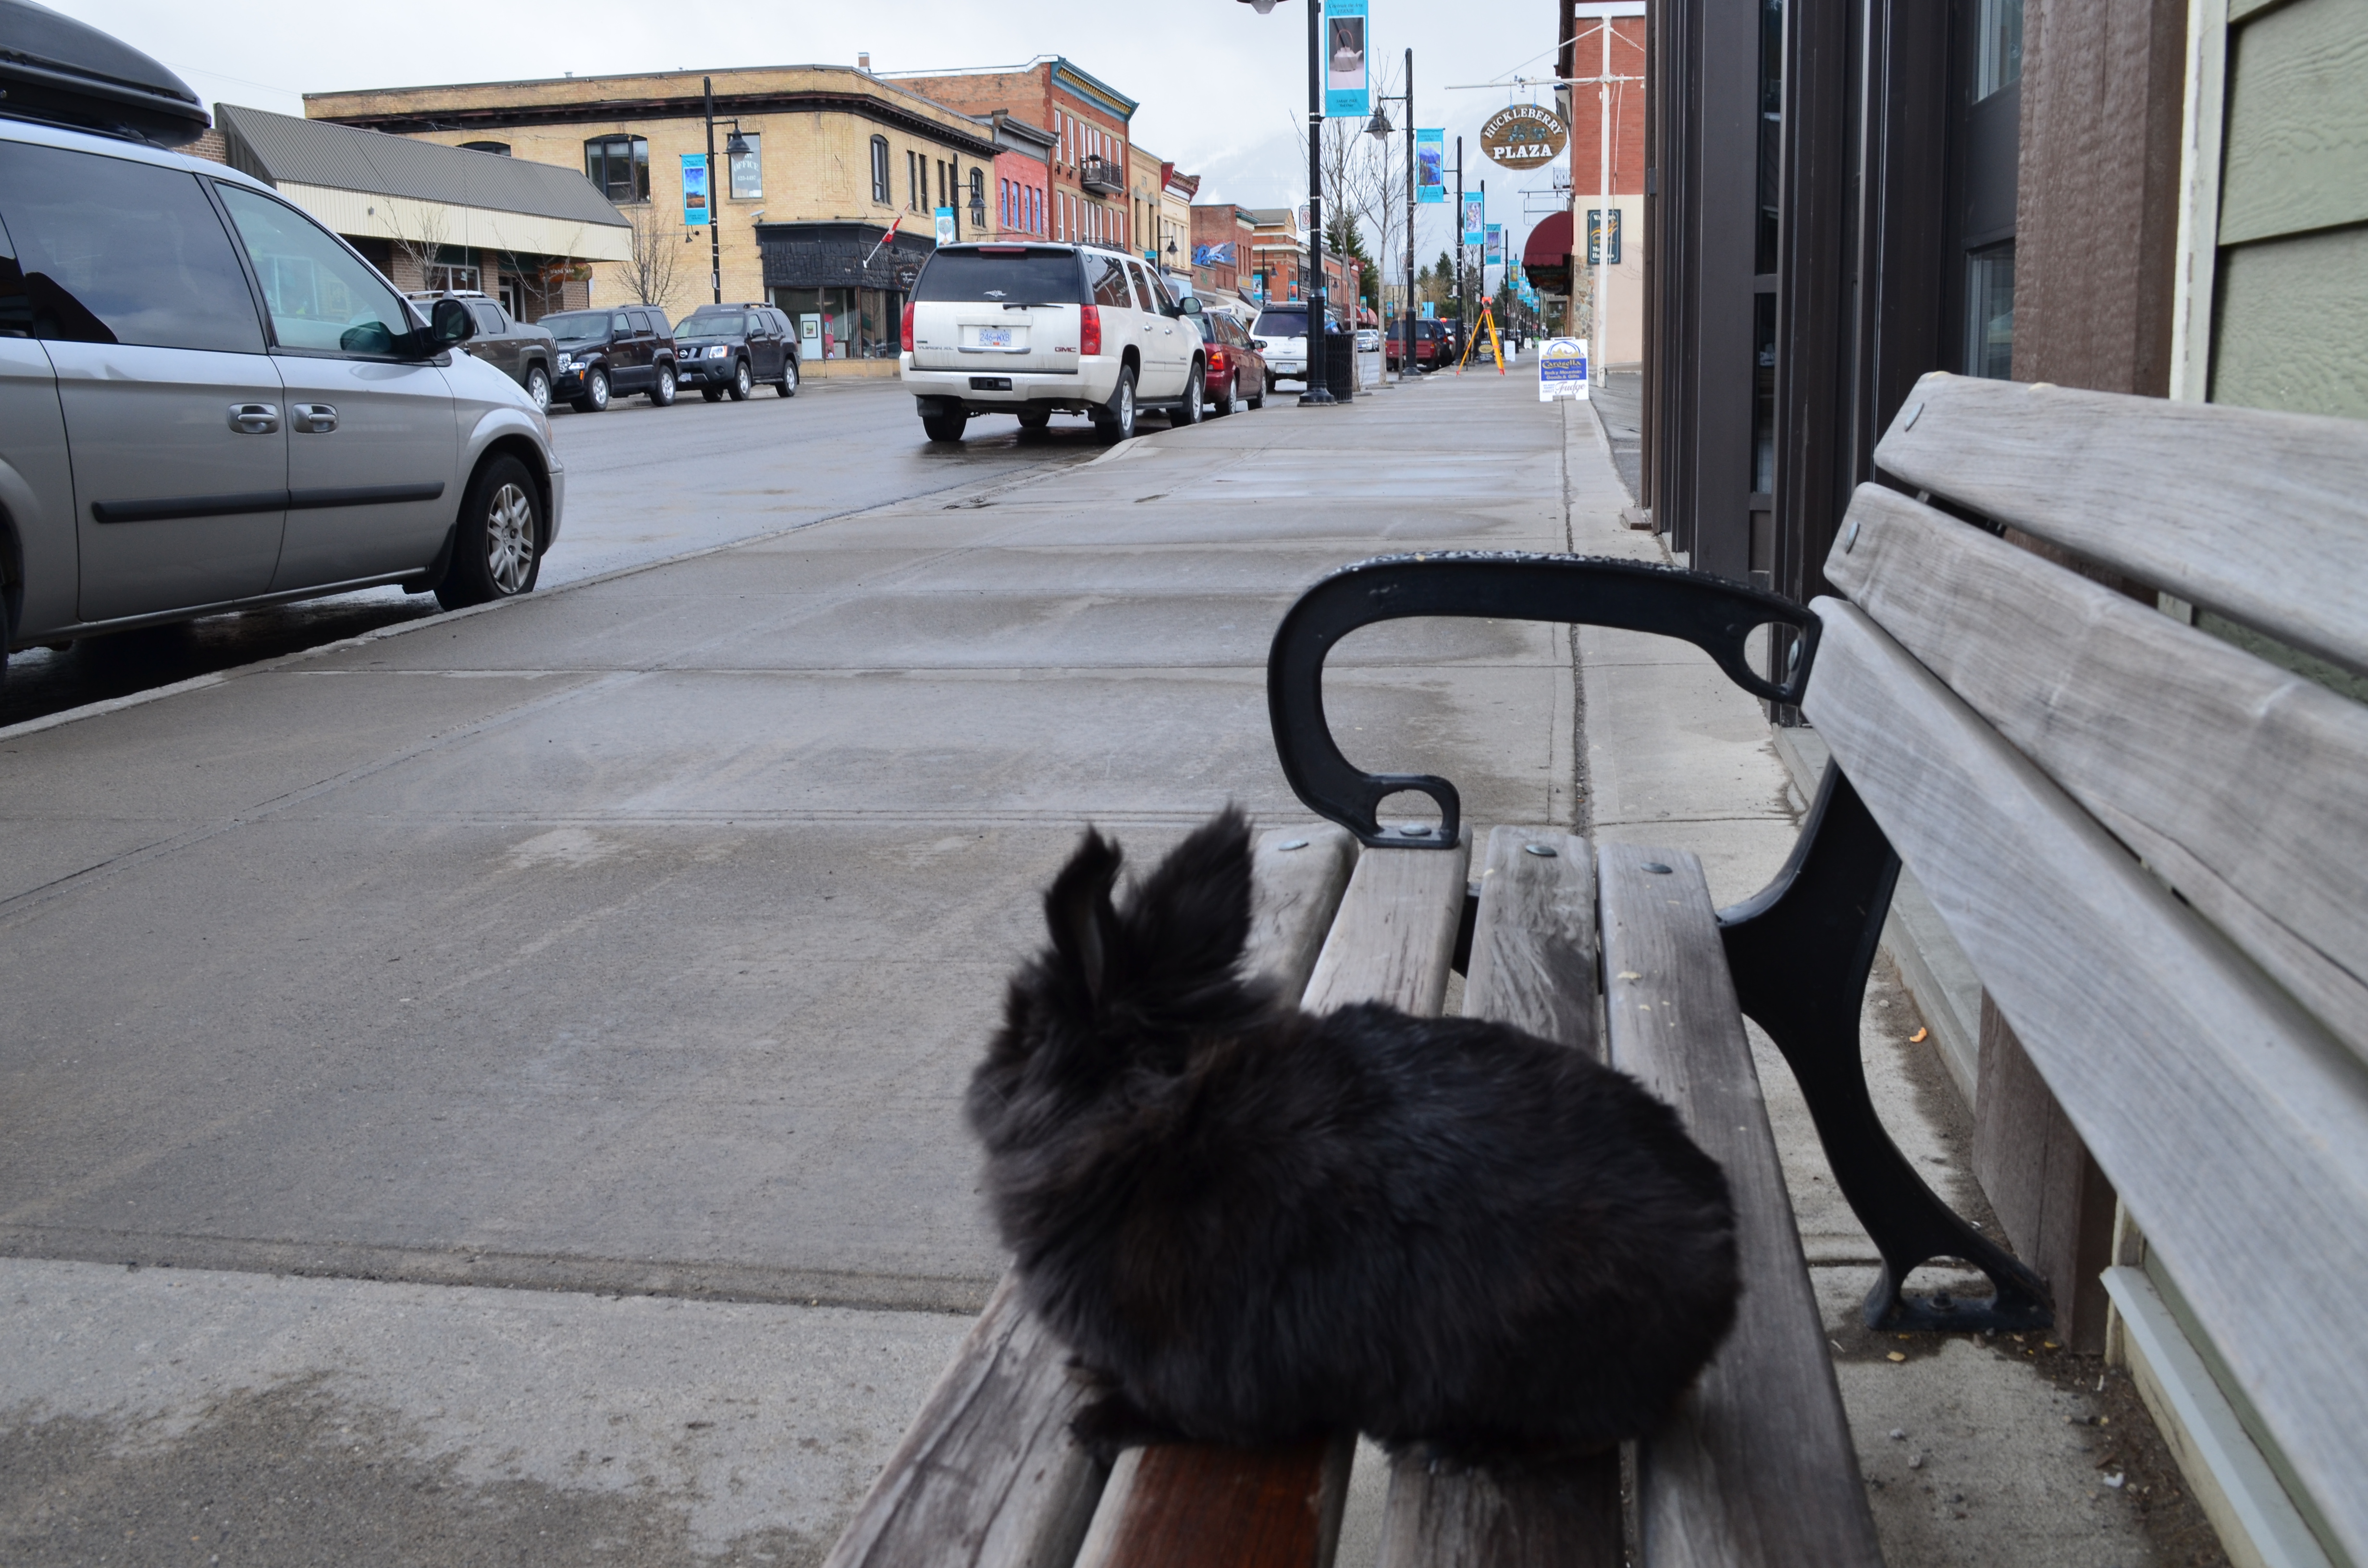 Pepper the traveling bunny